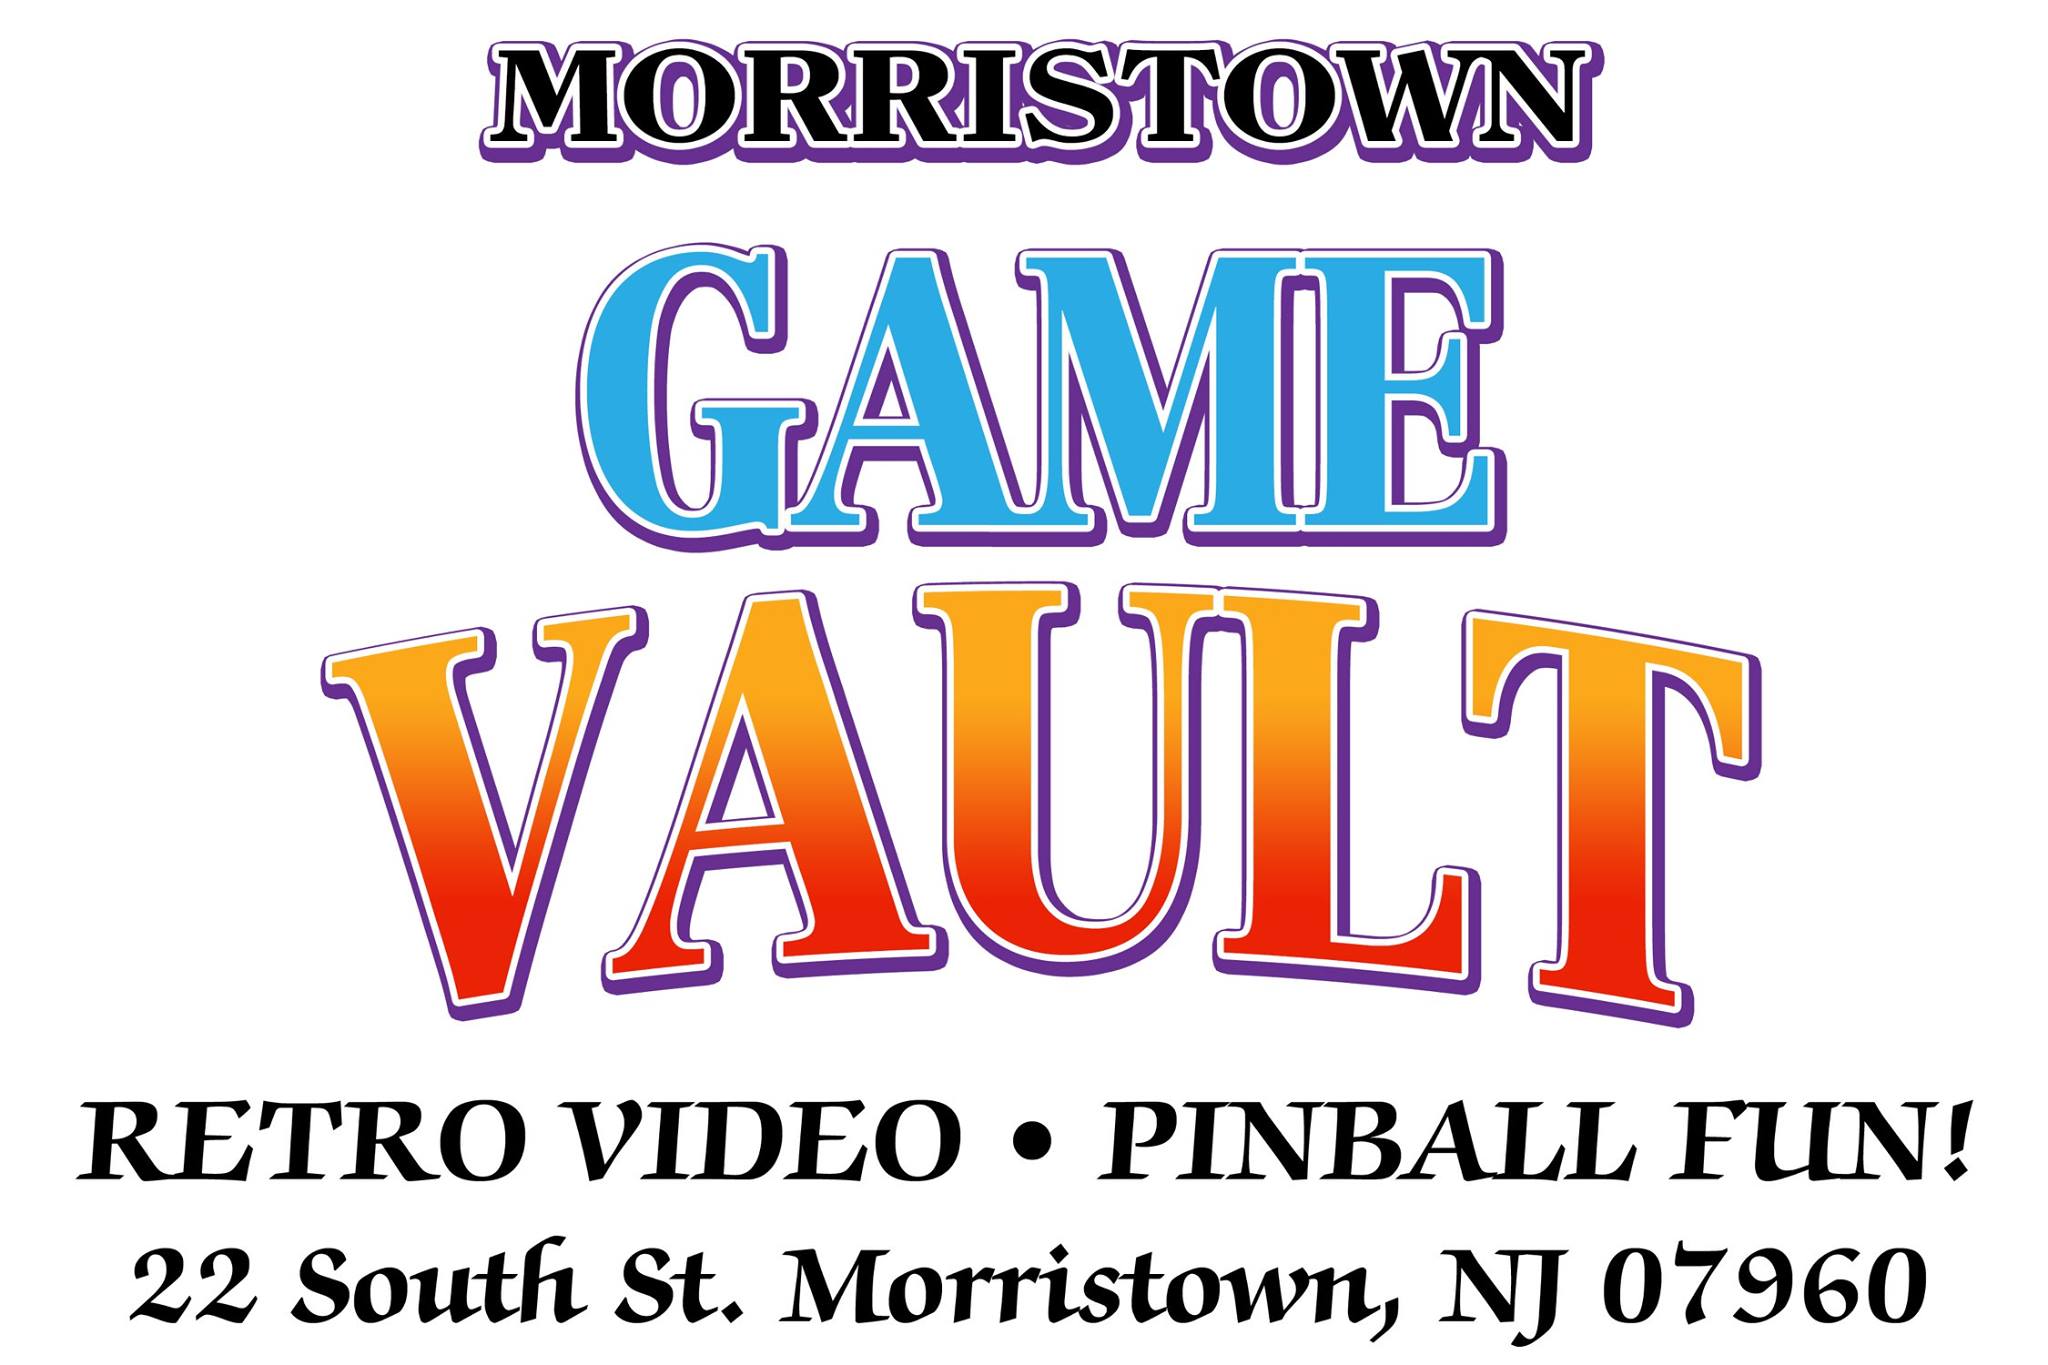 UPDATE! More prizes! Morristown, NJ Tournament This Weekend!